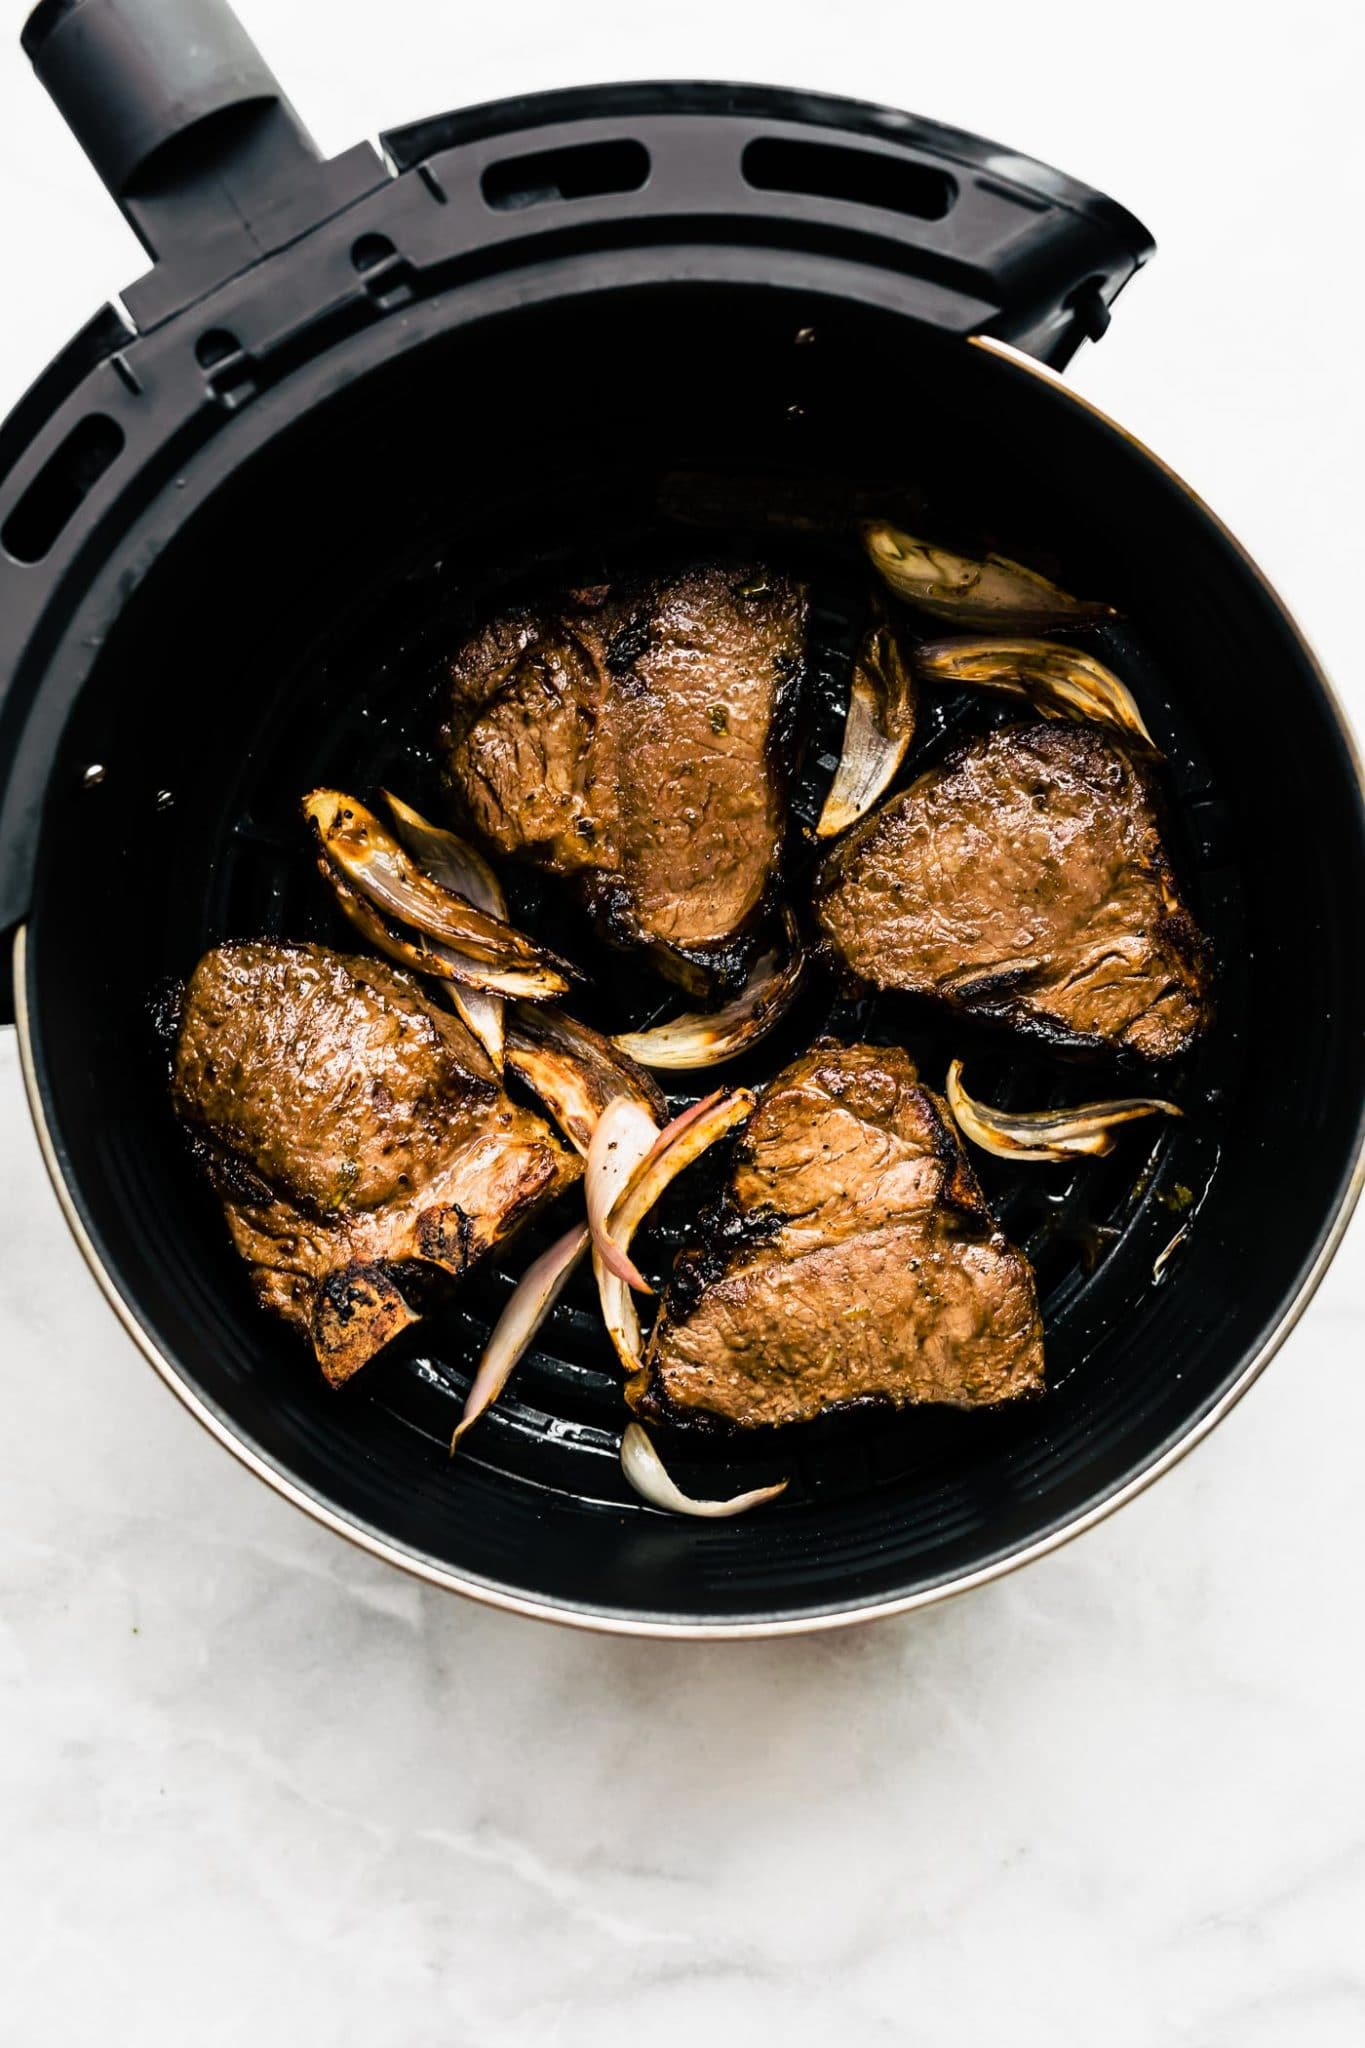 cooked lamb inside an air fryer on a white countertop